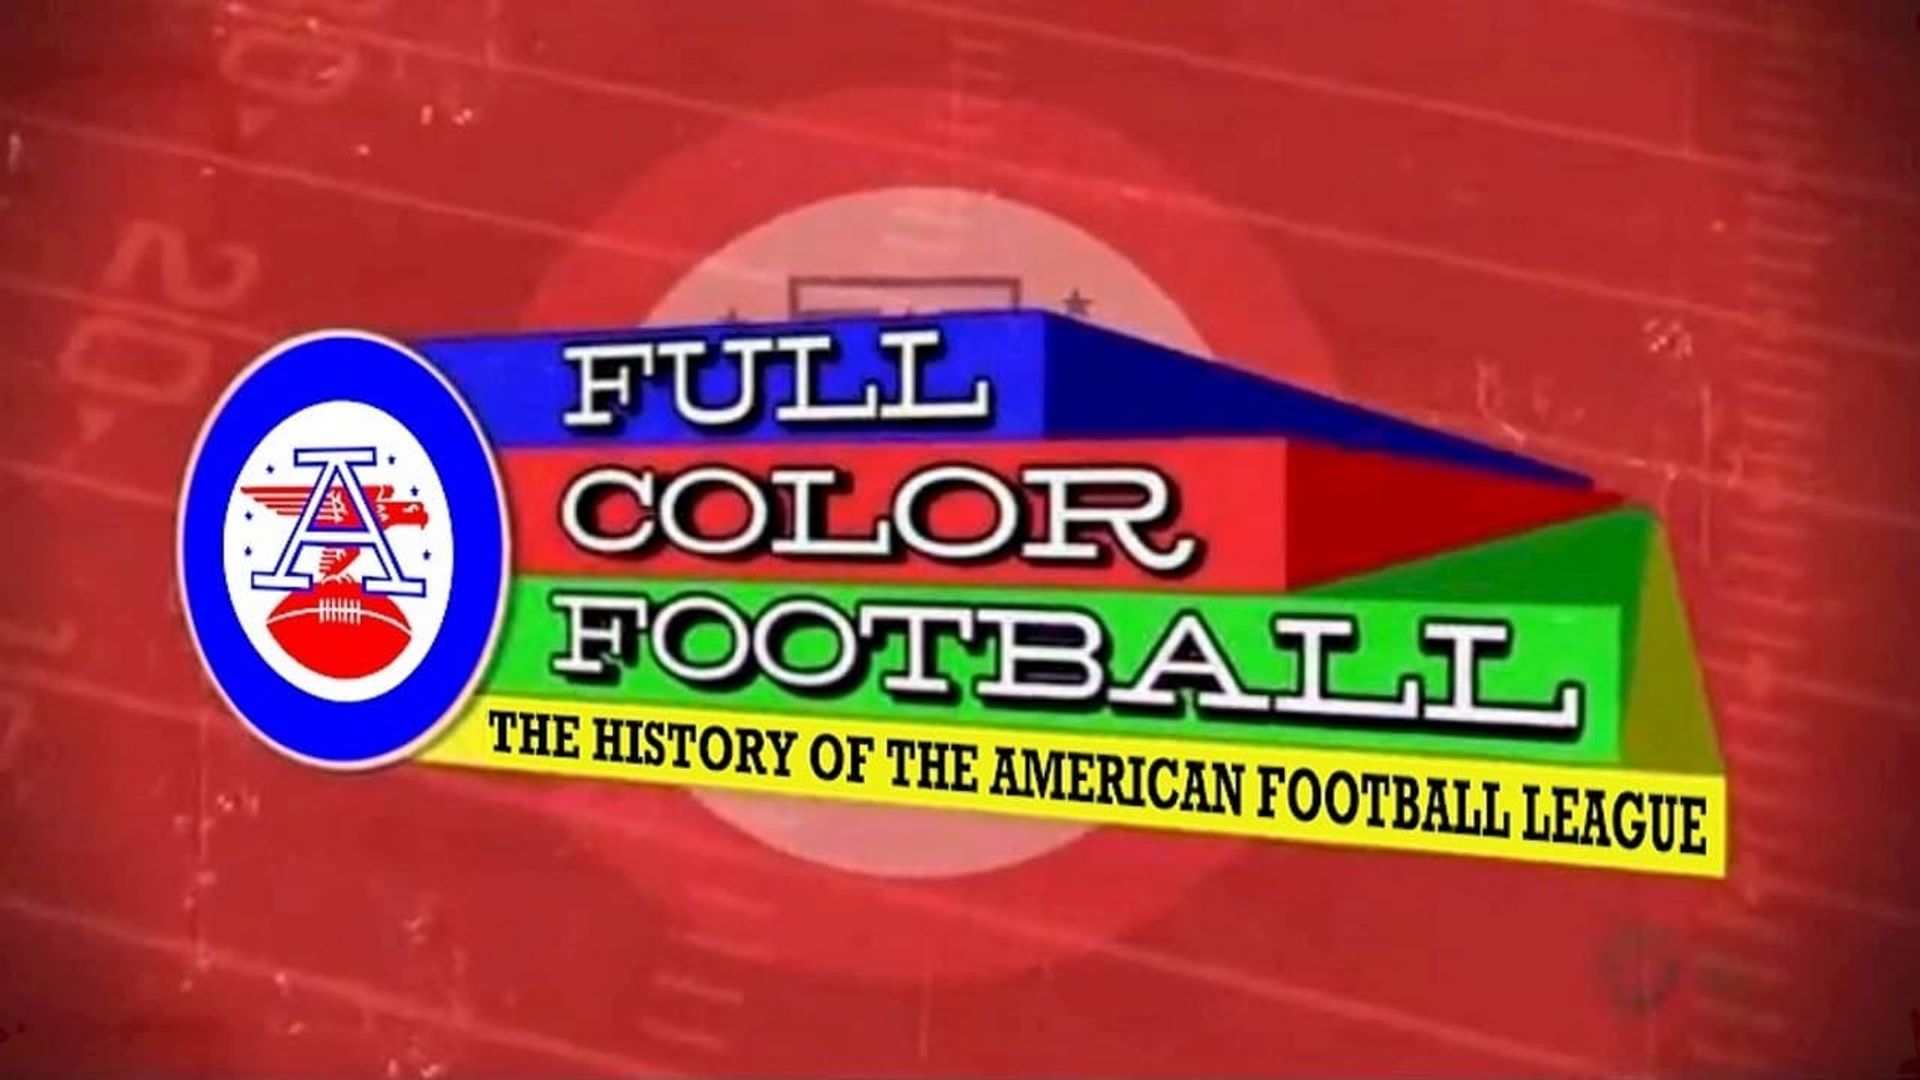 Full Color Football: The History of the American Football League background